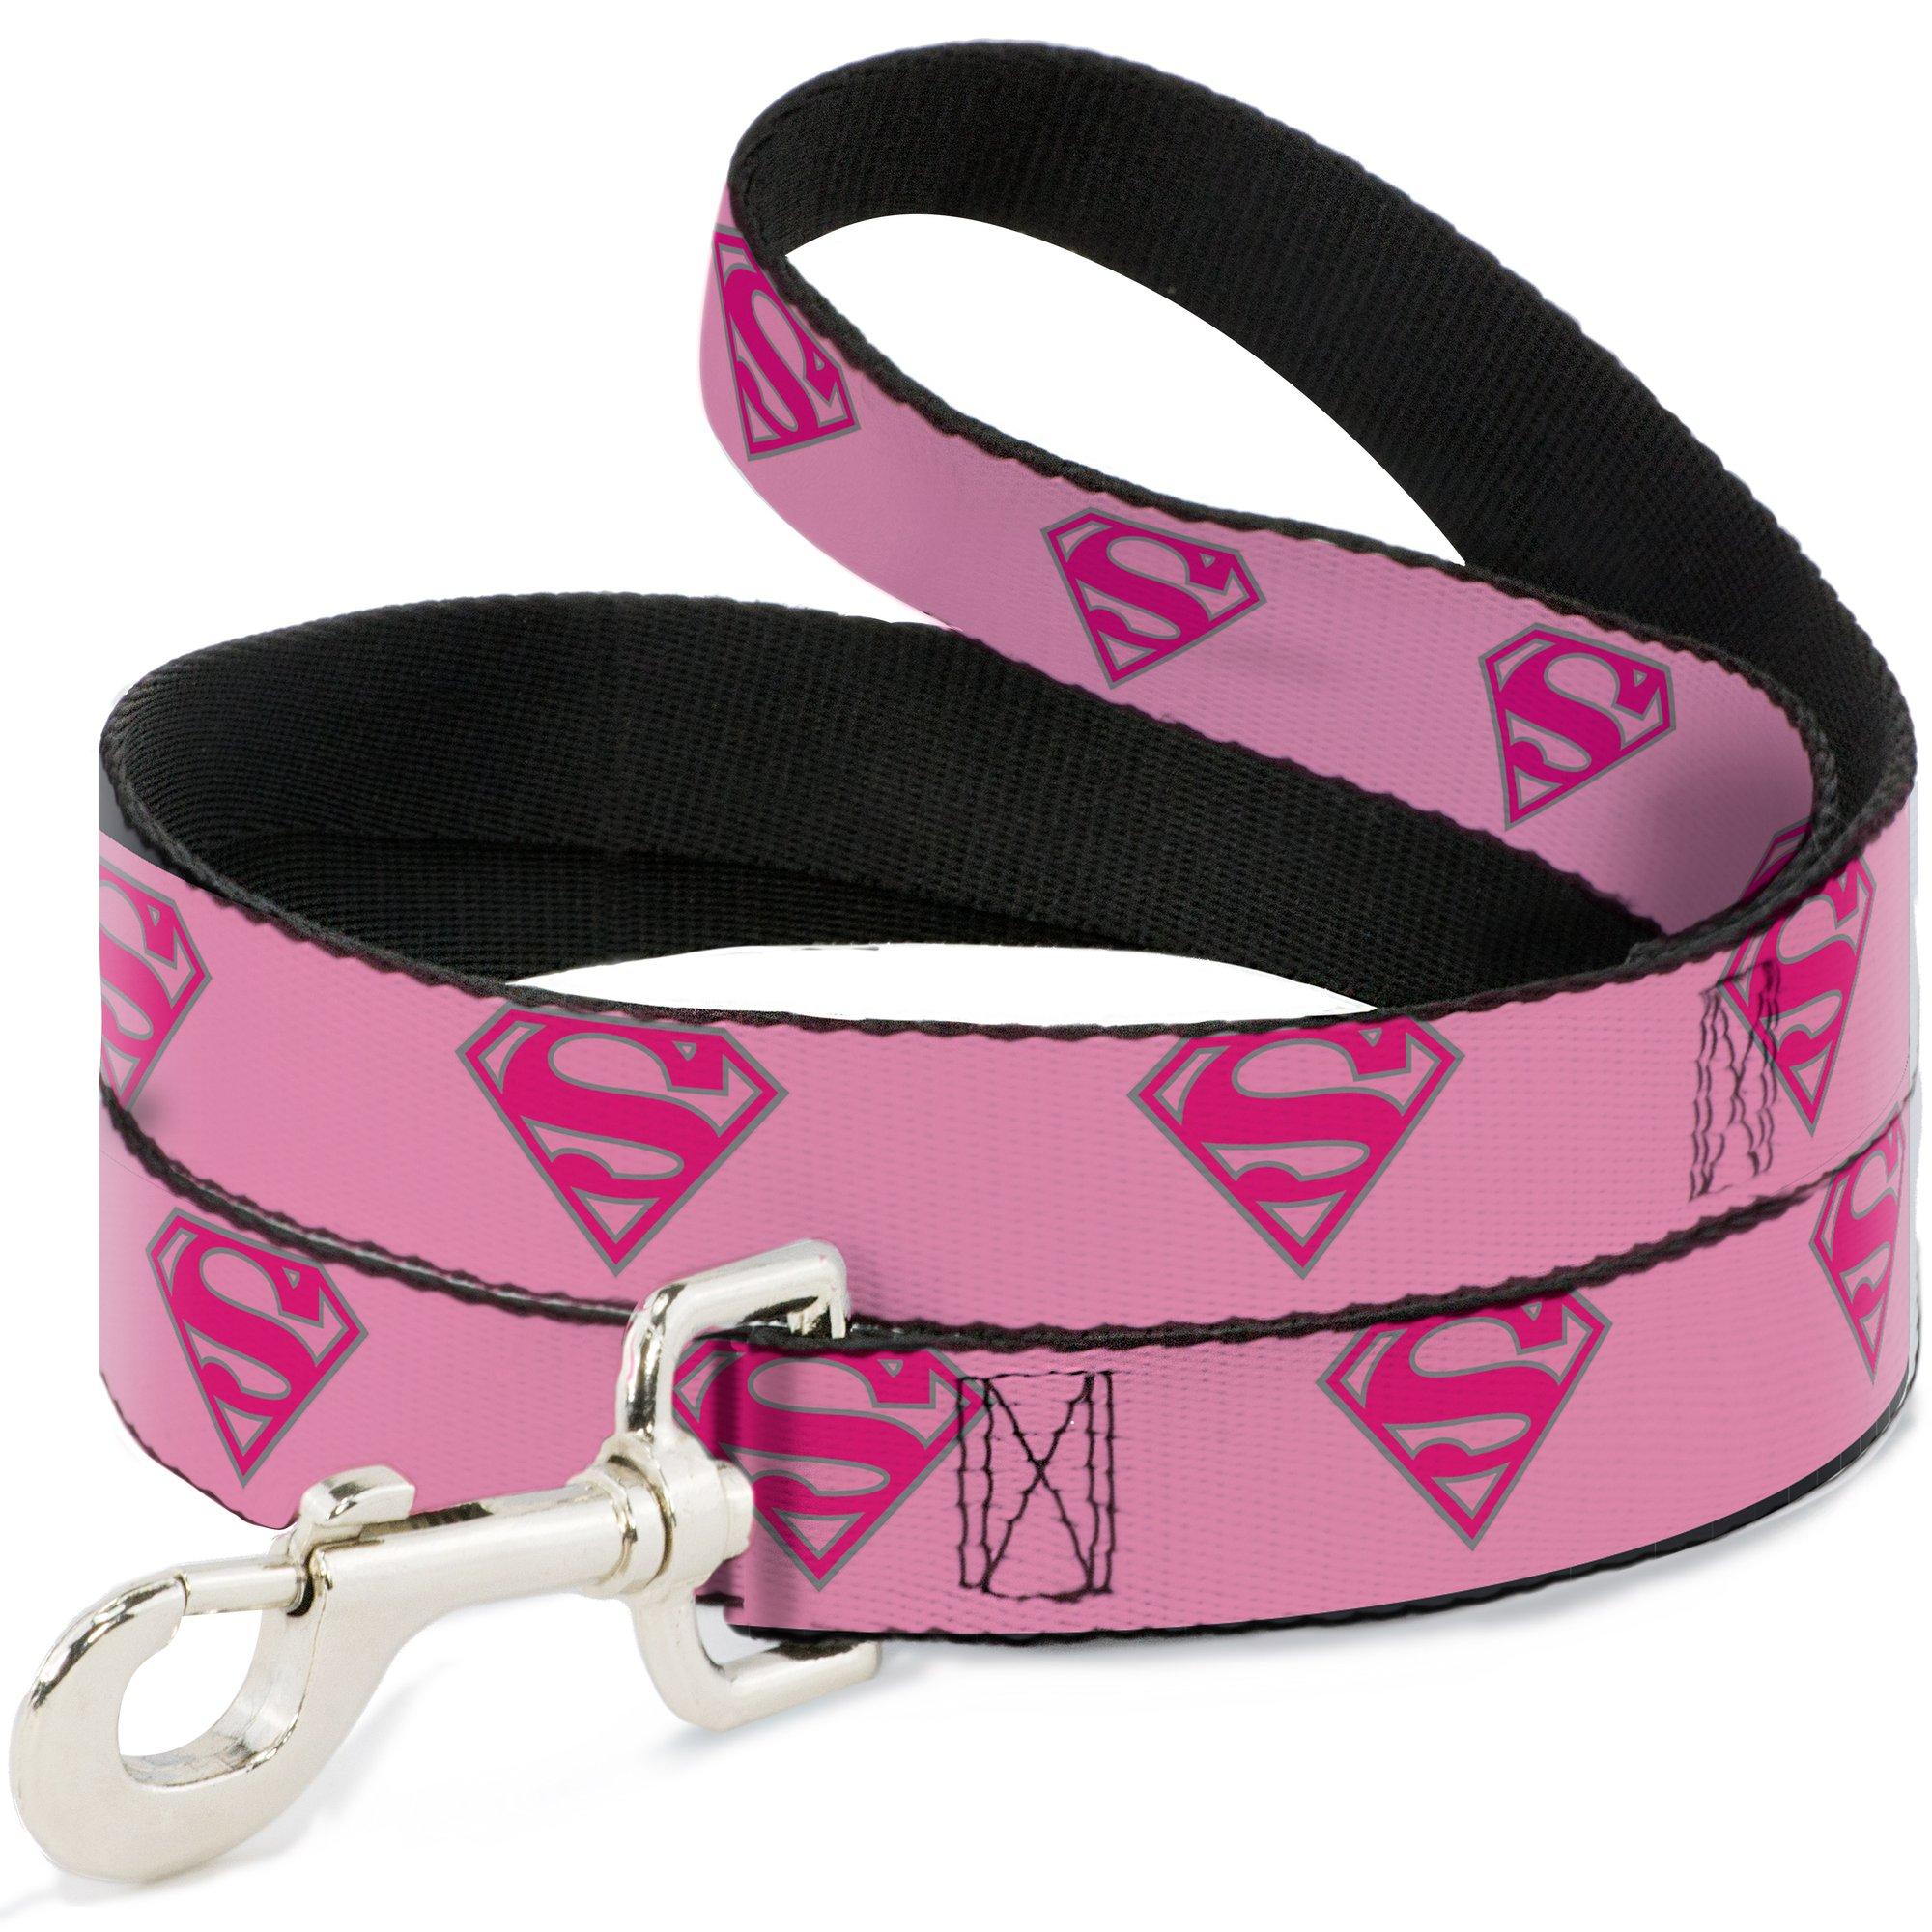 Superman Shield Dog Leash by Buckle-Down - Pink